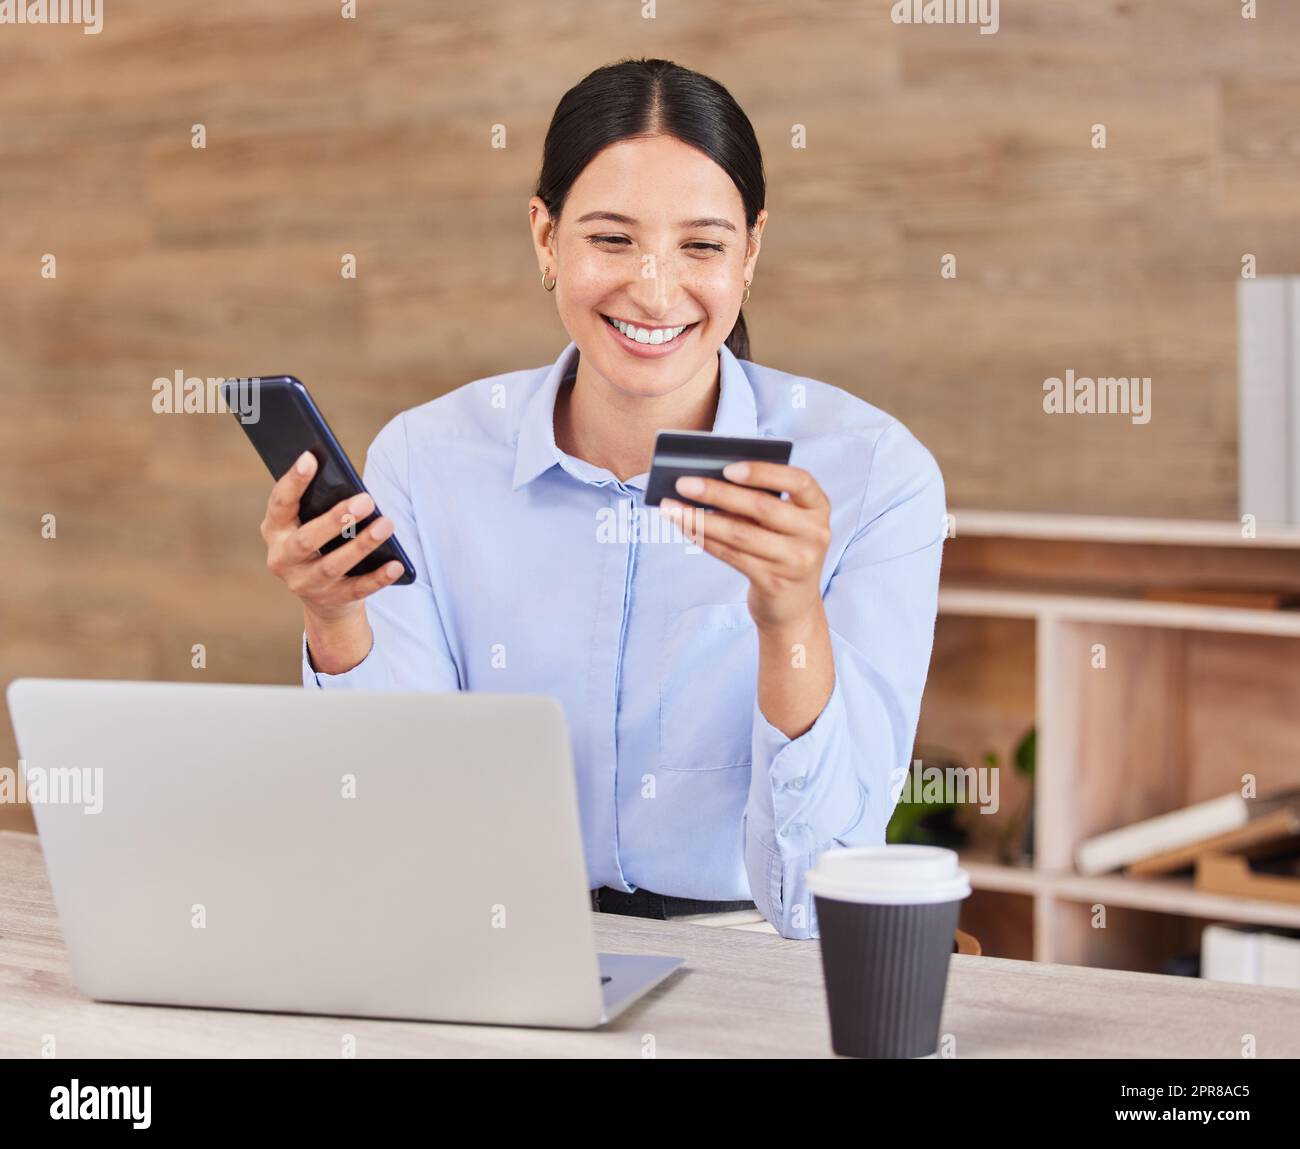 Beautiful young mixed race woman reading her credit card while using her phone and laptop to shop online while sitting in the office at work. Shopping has never been simpler or more convenient Stock Photo